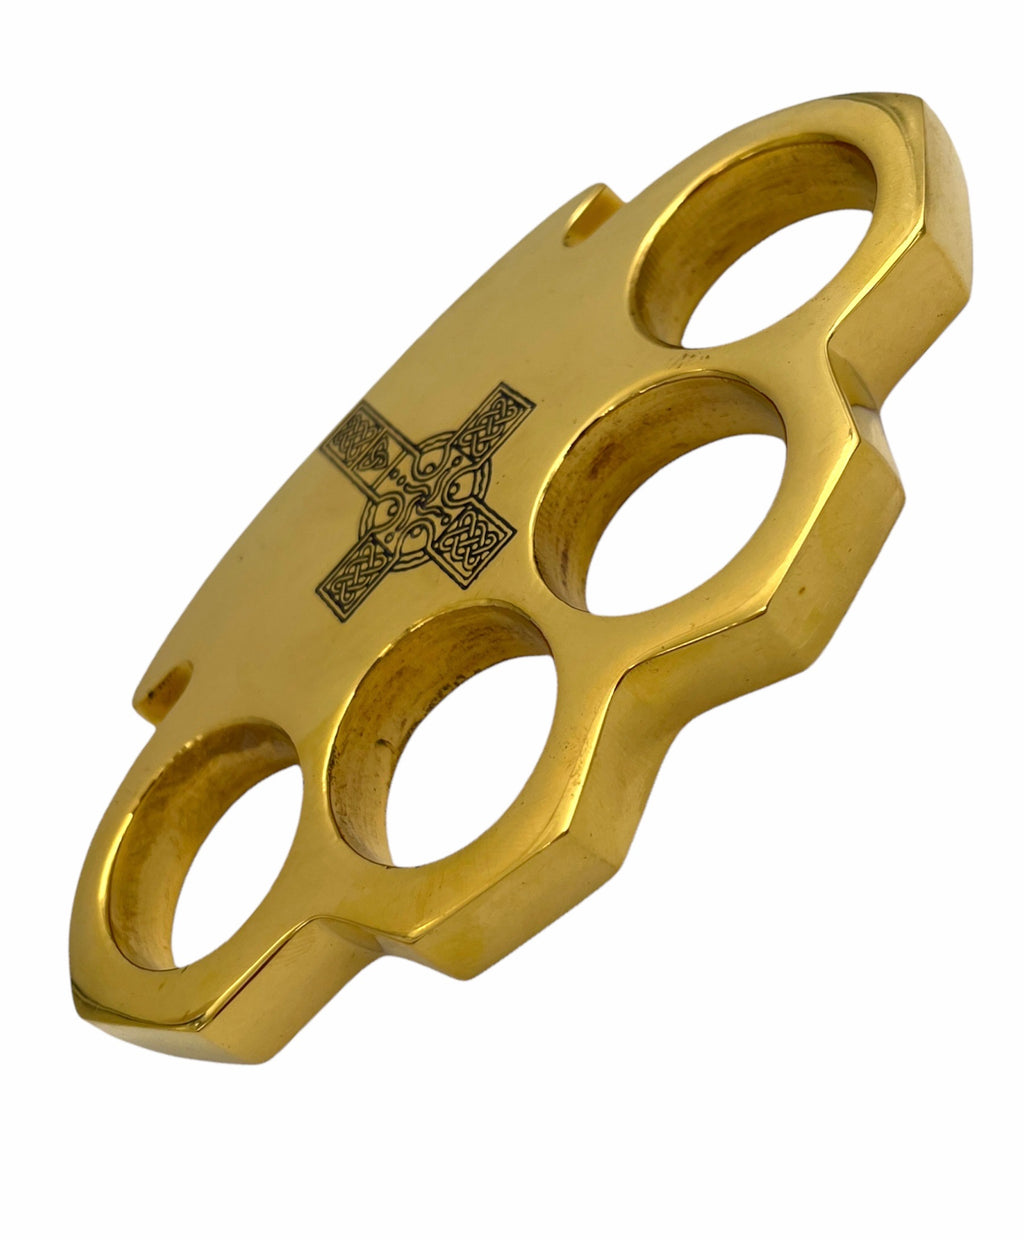 BRASS WITH CROSS AND BLACK COLOR FILLED KNUCKLE